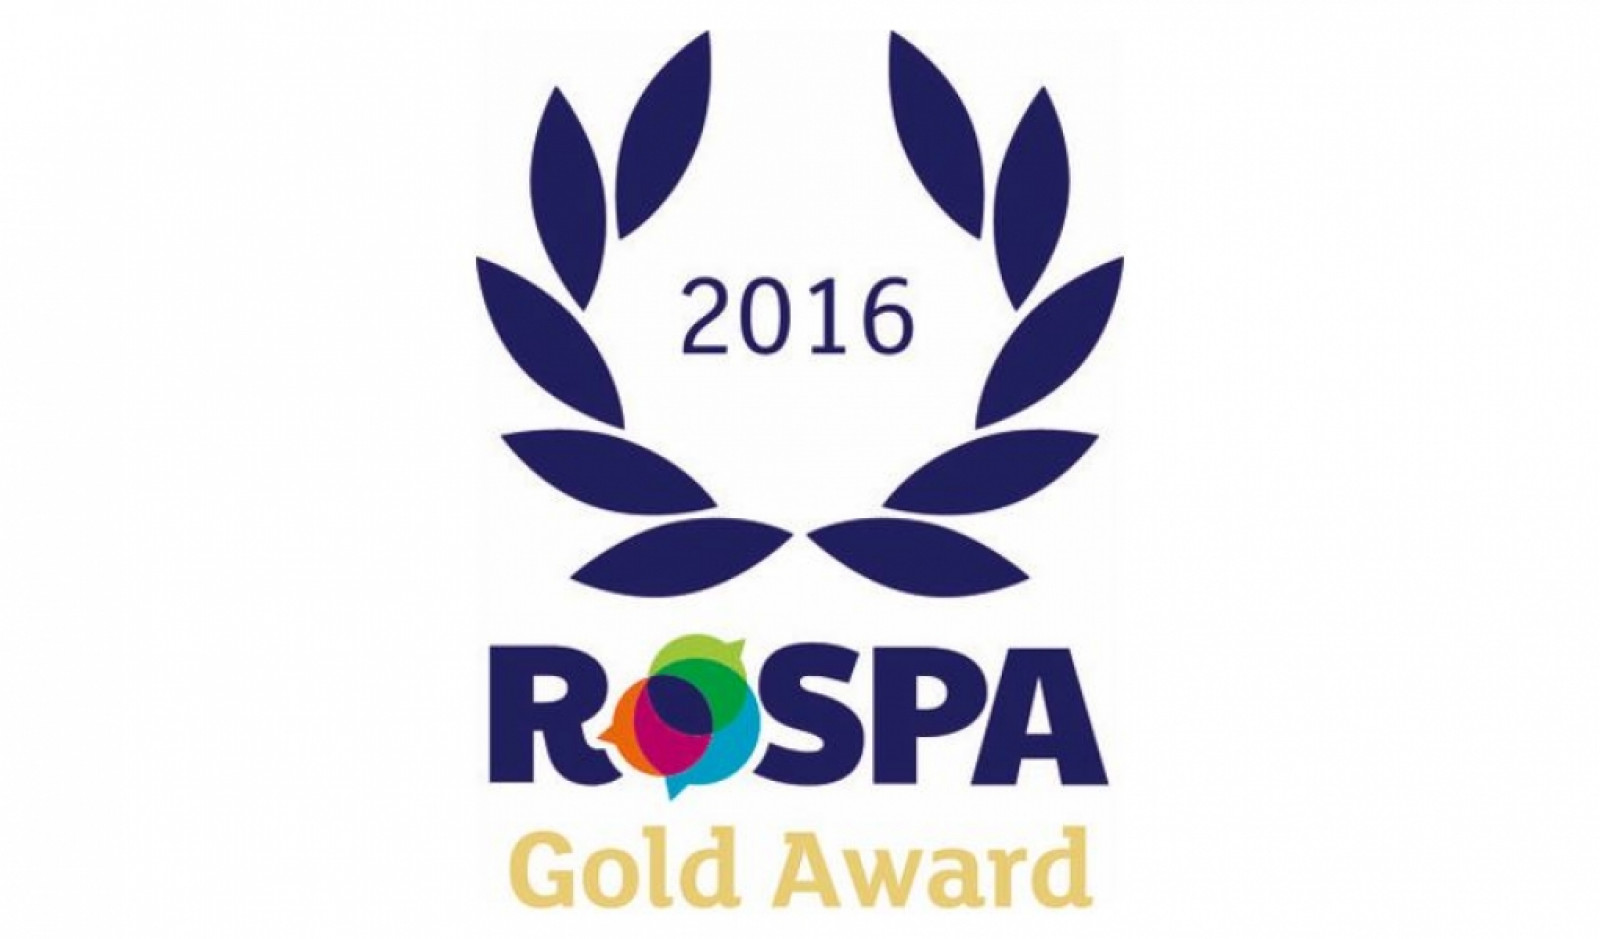 Hayley Group is a Gold Winner in the RoSPA Awards 2016